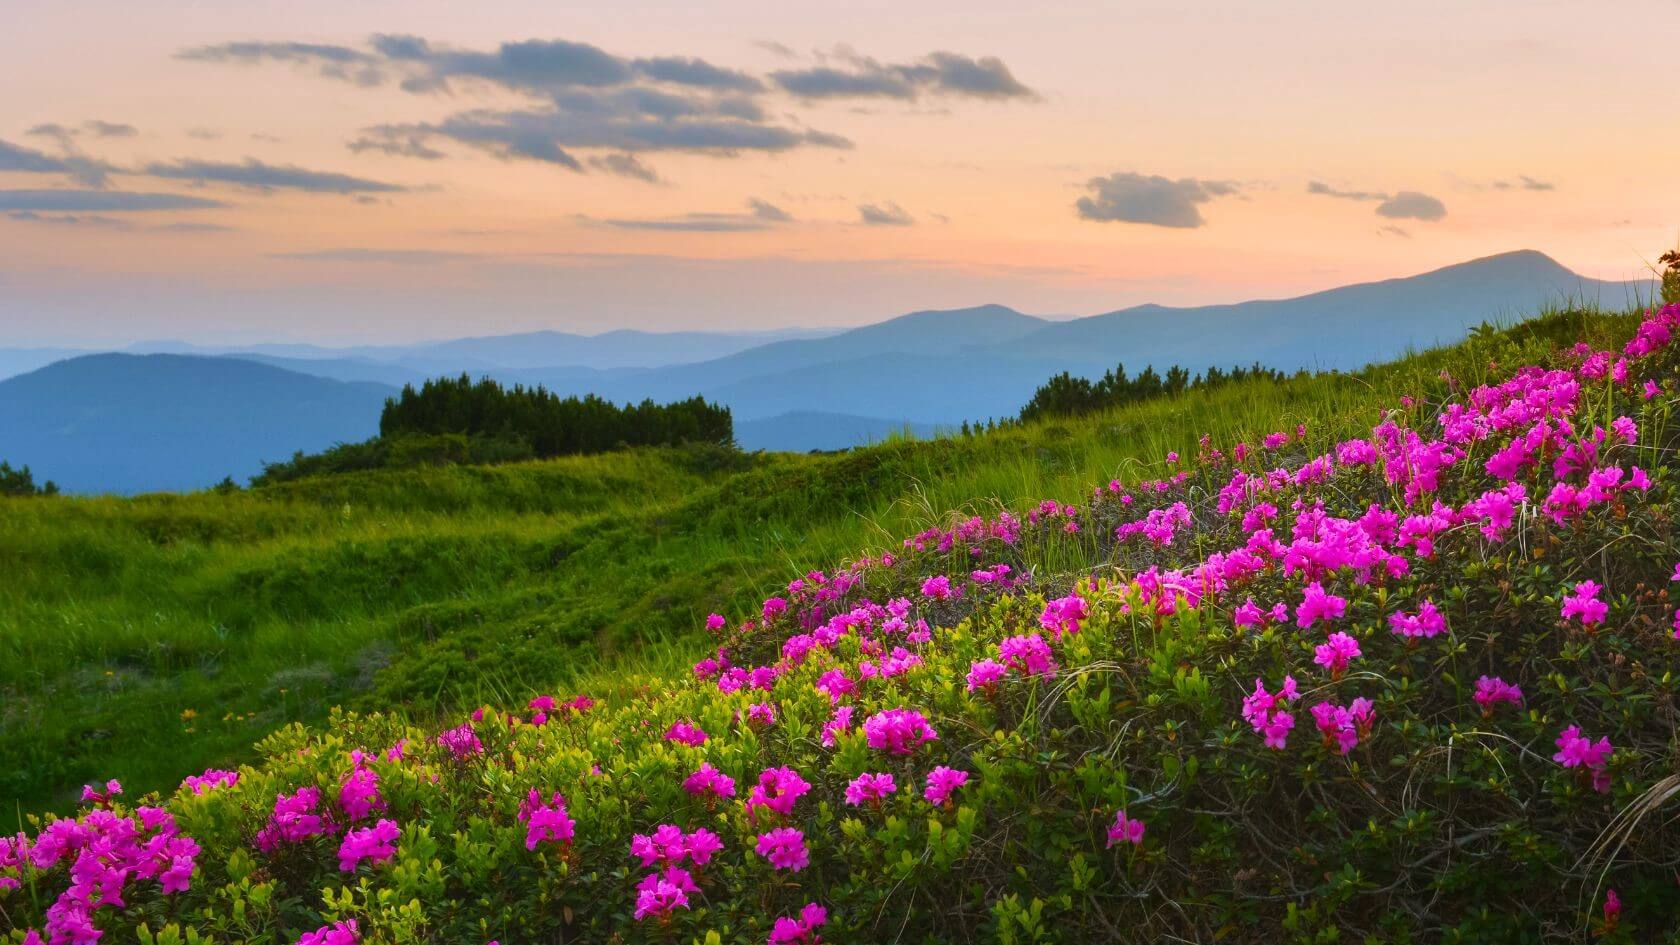 Sunset sky with atmospheric view of mountains and luscious green field half covered with crimson azaleas in full bloom presenting spring one of the best time to visit Darjeeling.